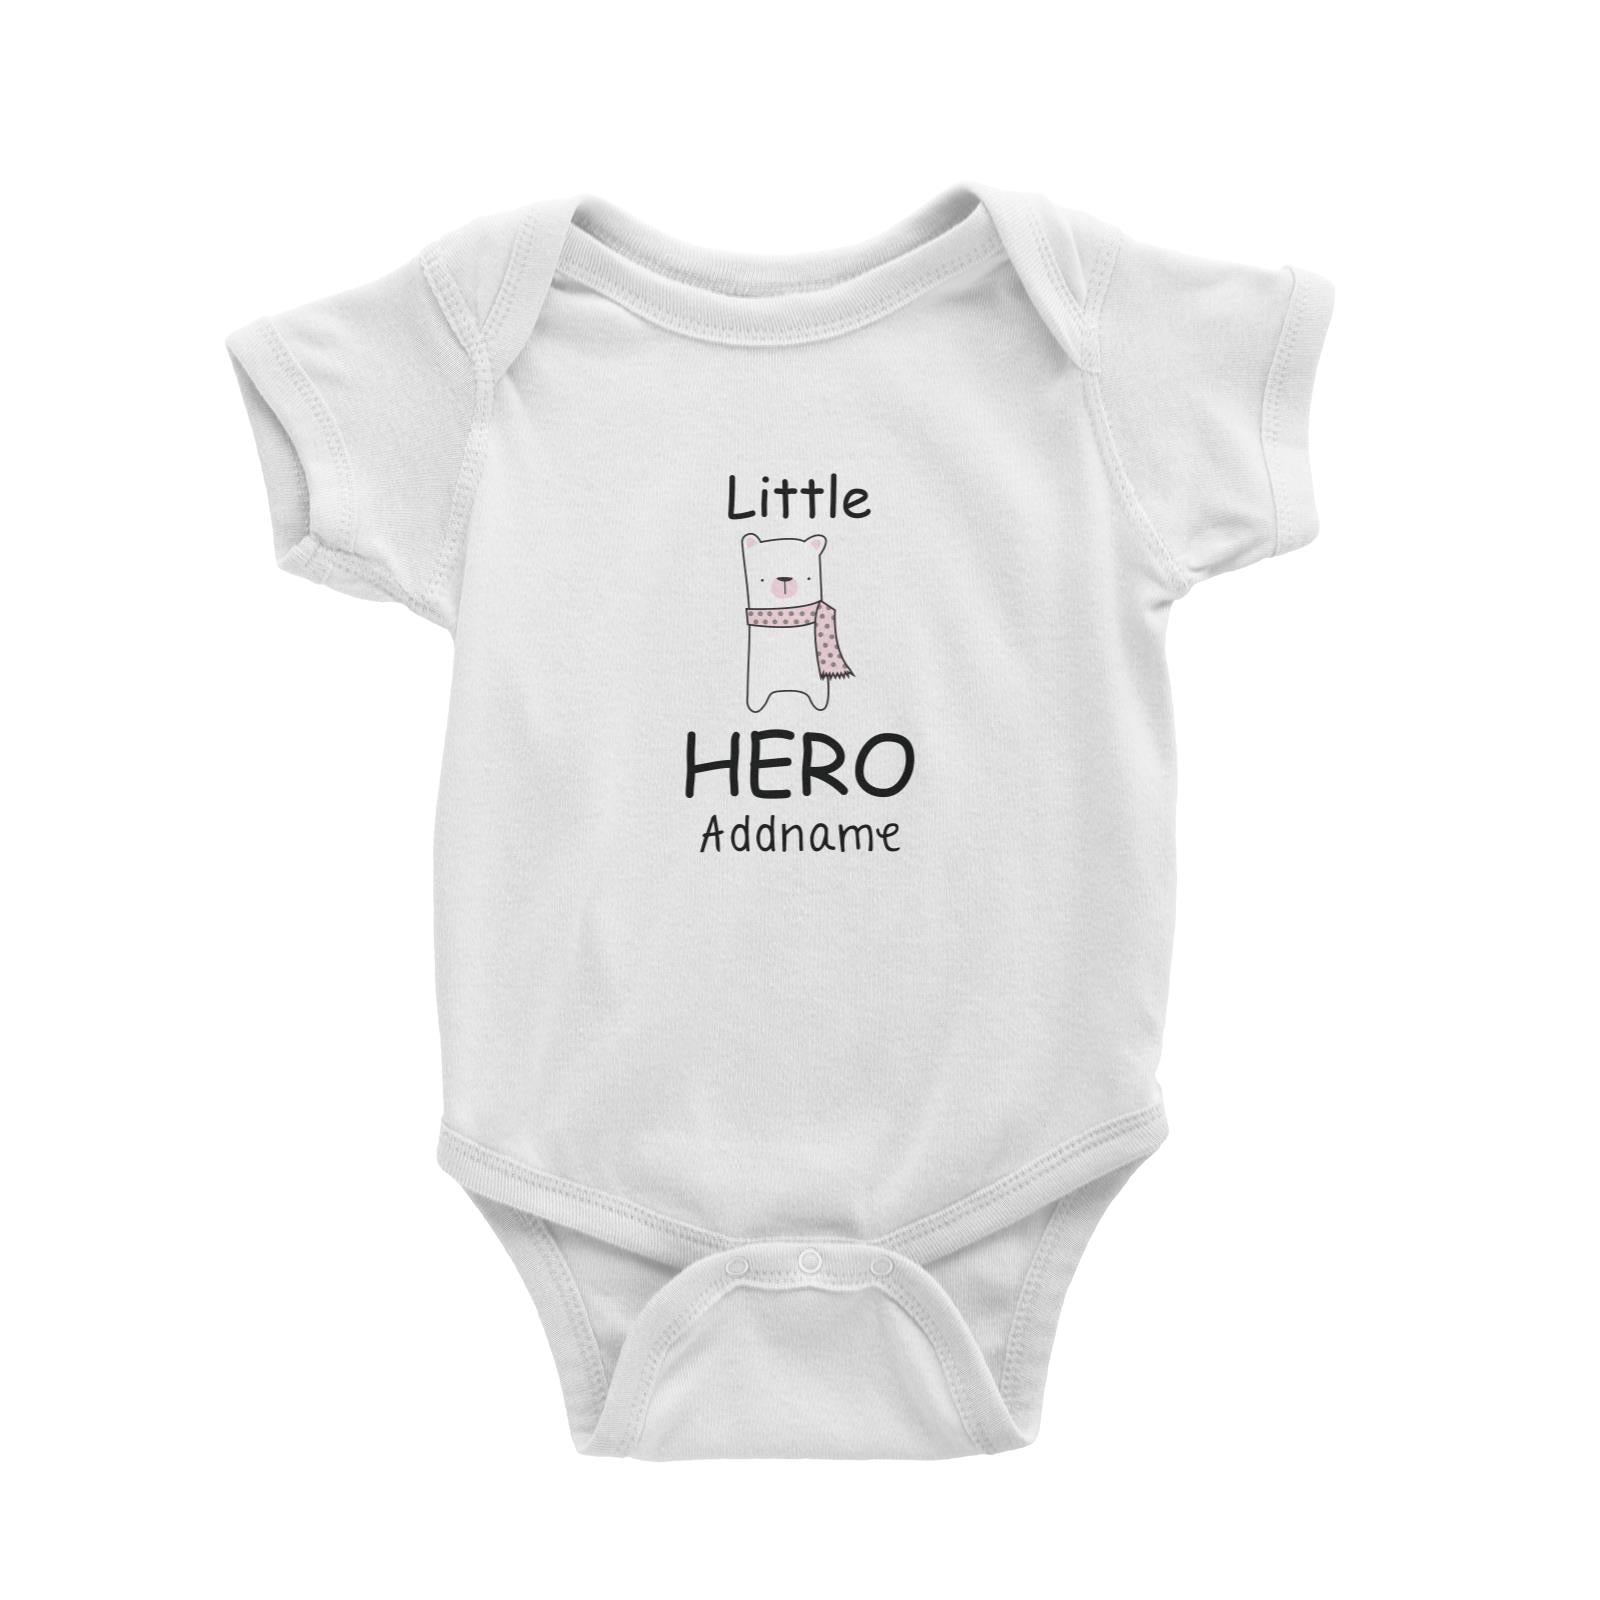 Cute Animals and Friends Series 2 Bear Little Hero Addname Baby Romper